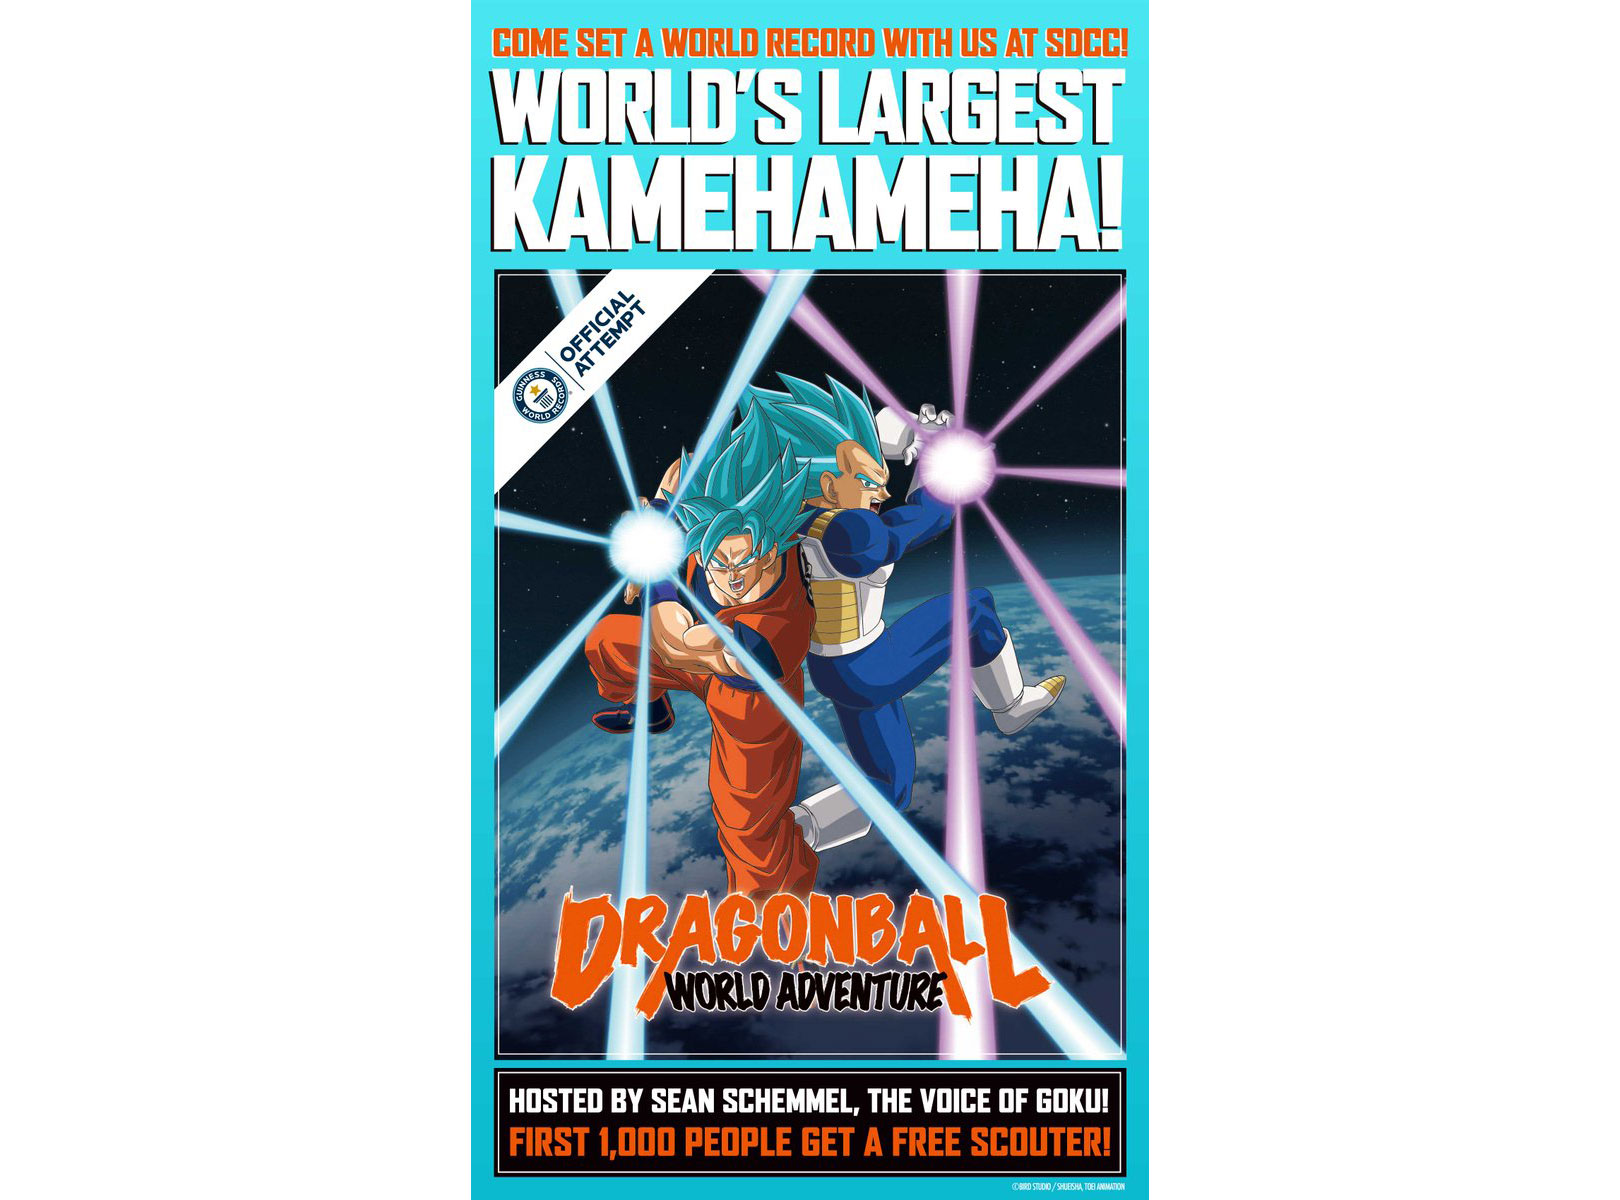 GUINNESS WORLD RECORD ATTEMPT FOR WORLD’S LARGEST KAMEHAMEHA KICKS OFF DRAGON BALL WORLD ADVENTURE AT SAN DIEGO COMIC CON